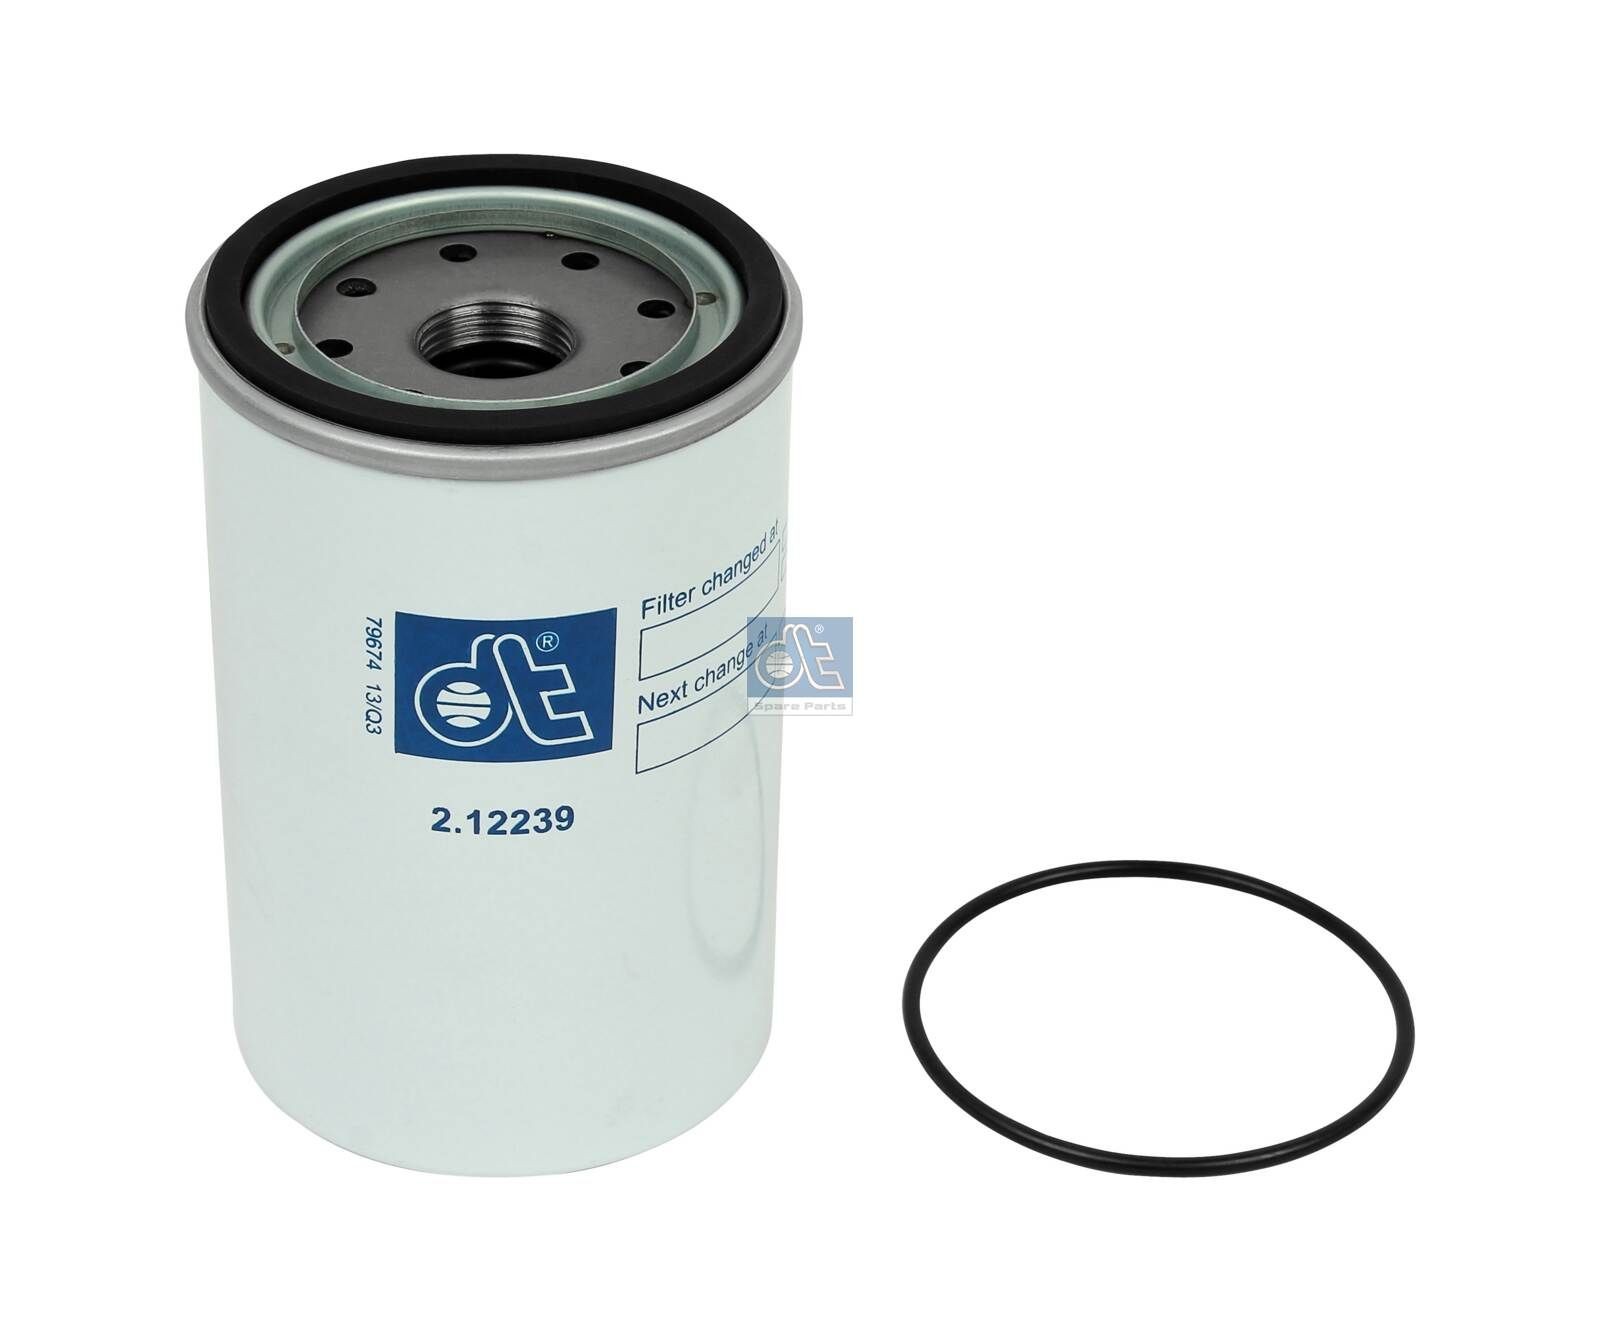 WK 940/33 x DT Spare Parts 2.12239 Fuel filter 2 0541 383